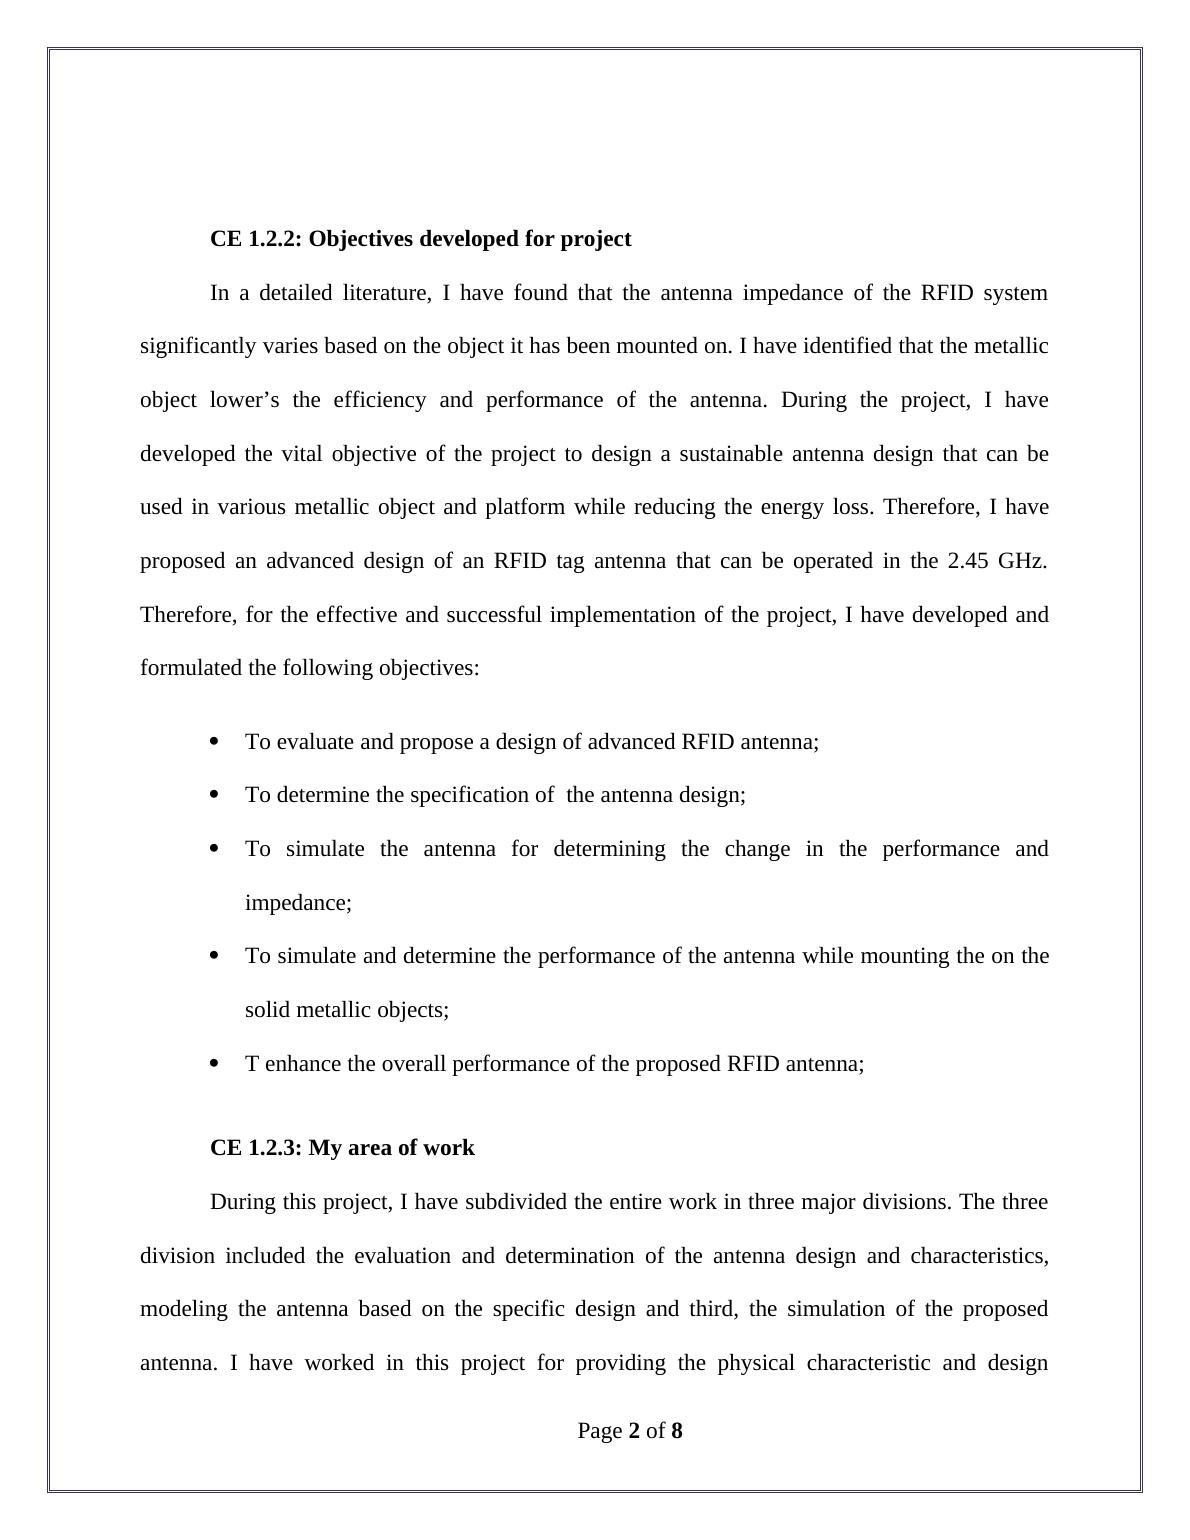 Competency Demonstration Report  : Design of RFID Tag Antenna_3